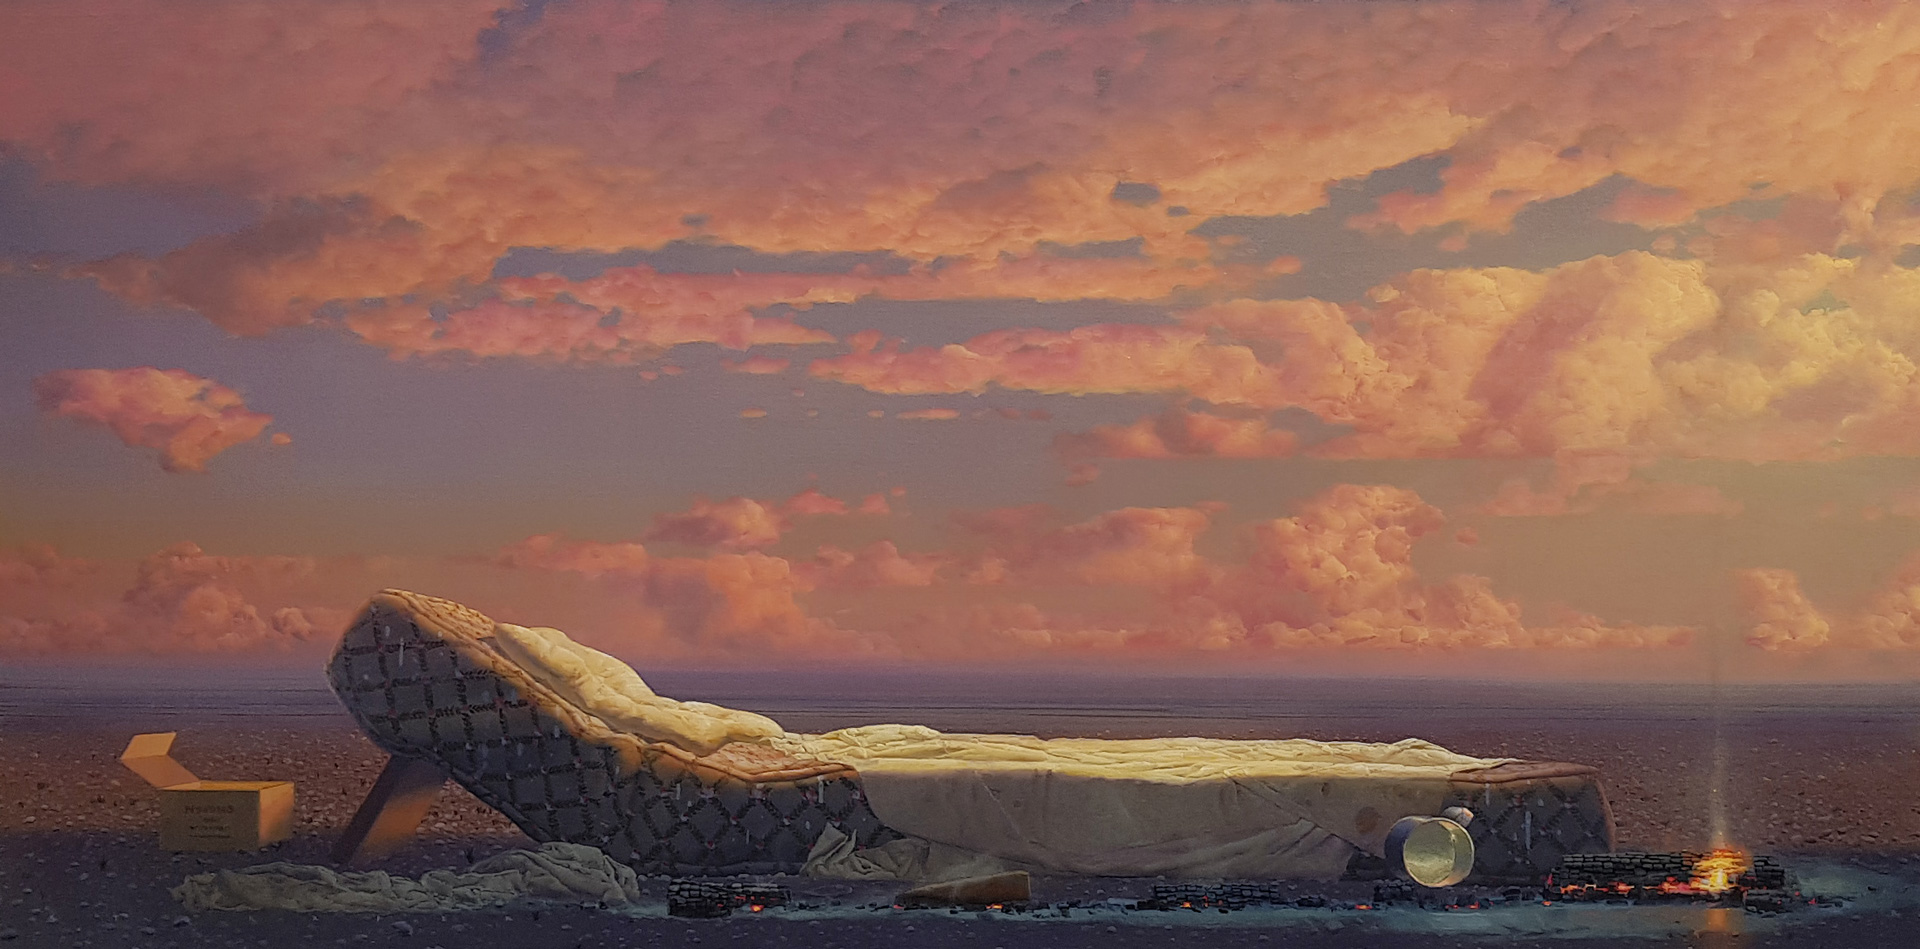 The Arcadian Repose, Tim Storrier, 107 x 244 cm, acrylic on canvas (2020)